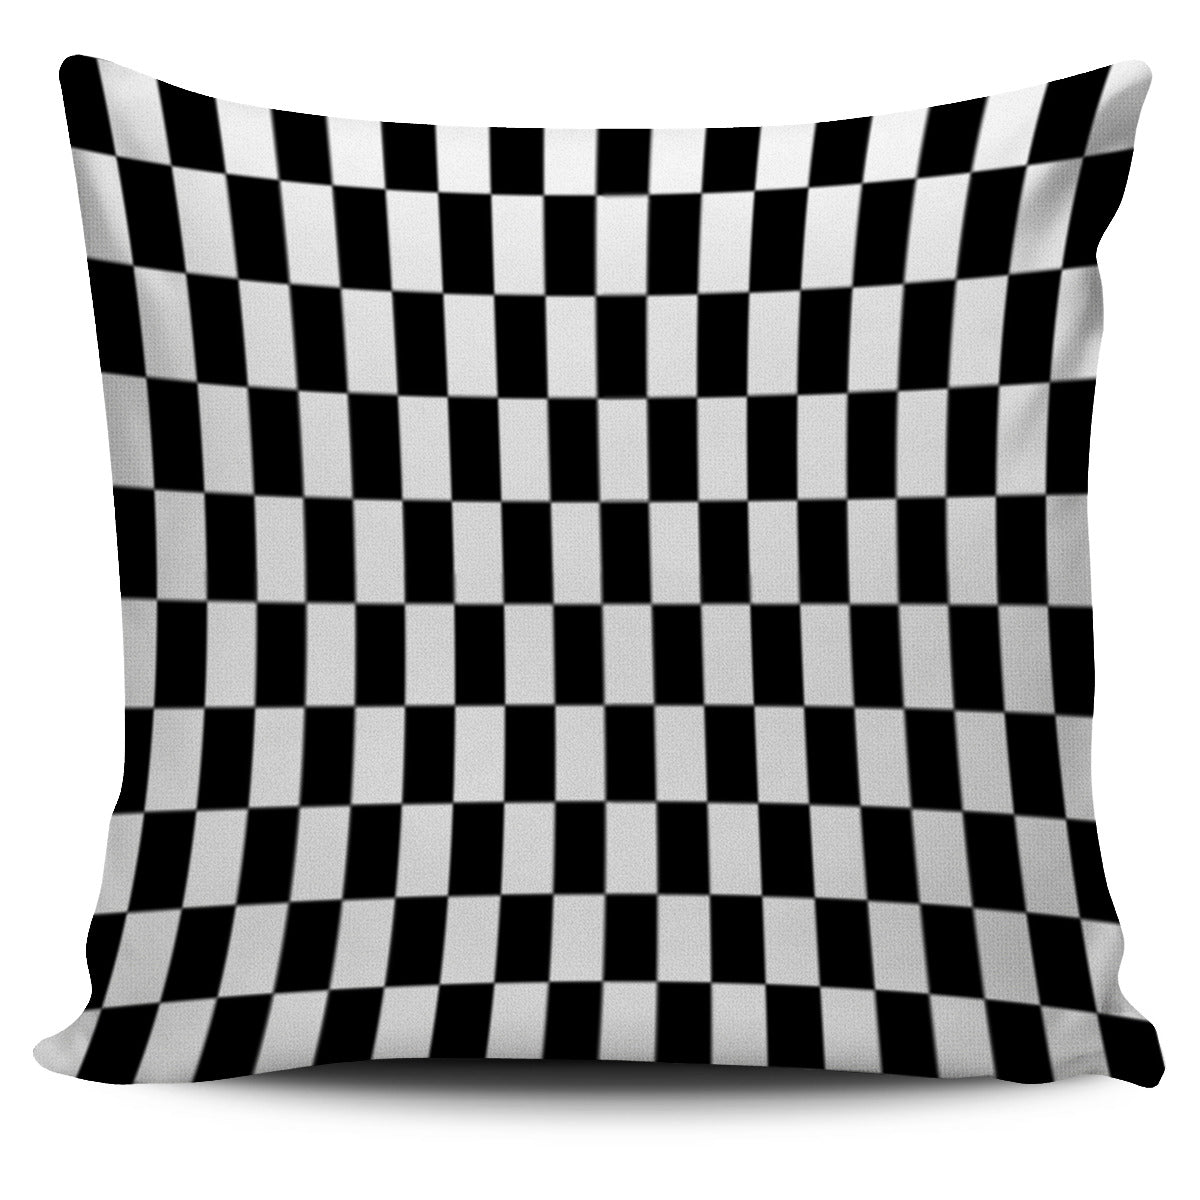 Racing Pillow Cover V17